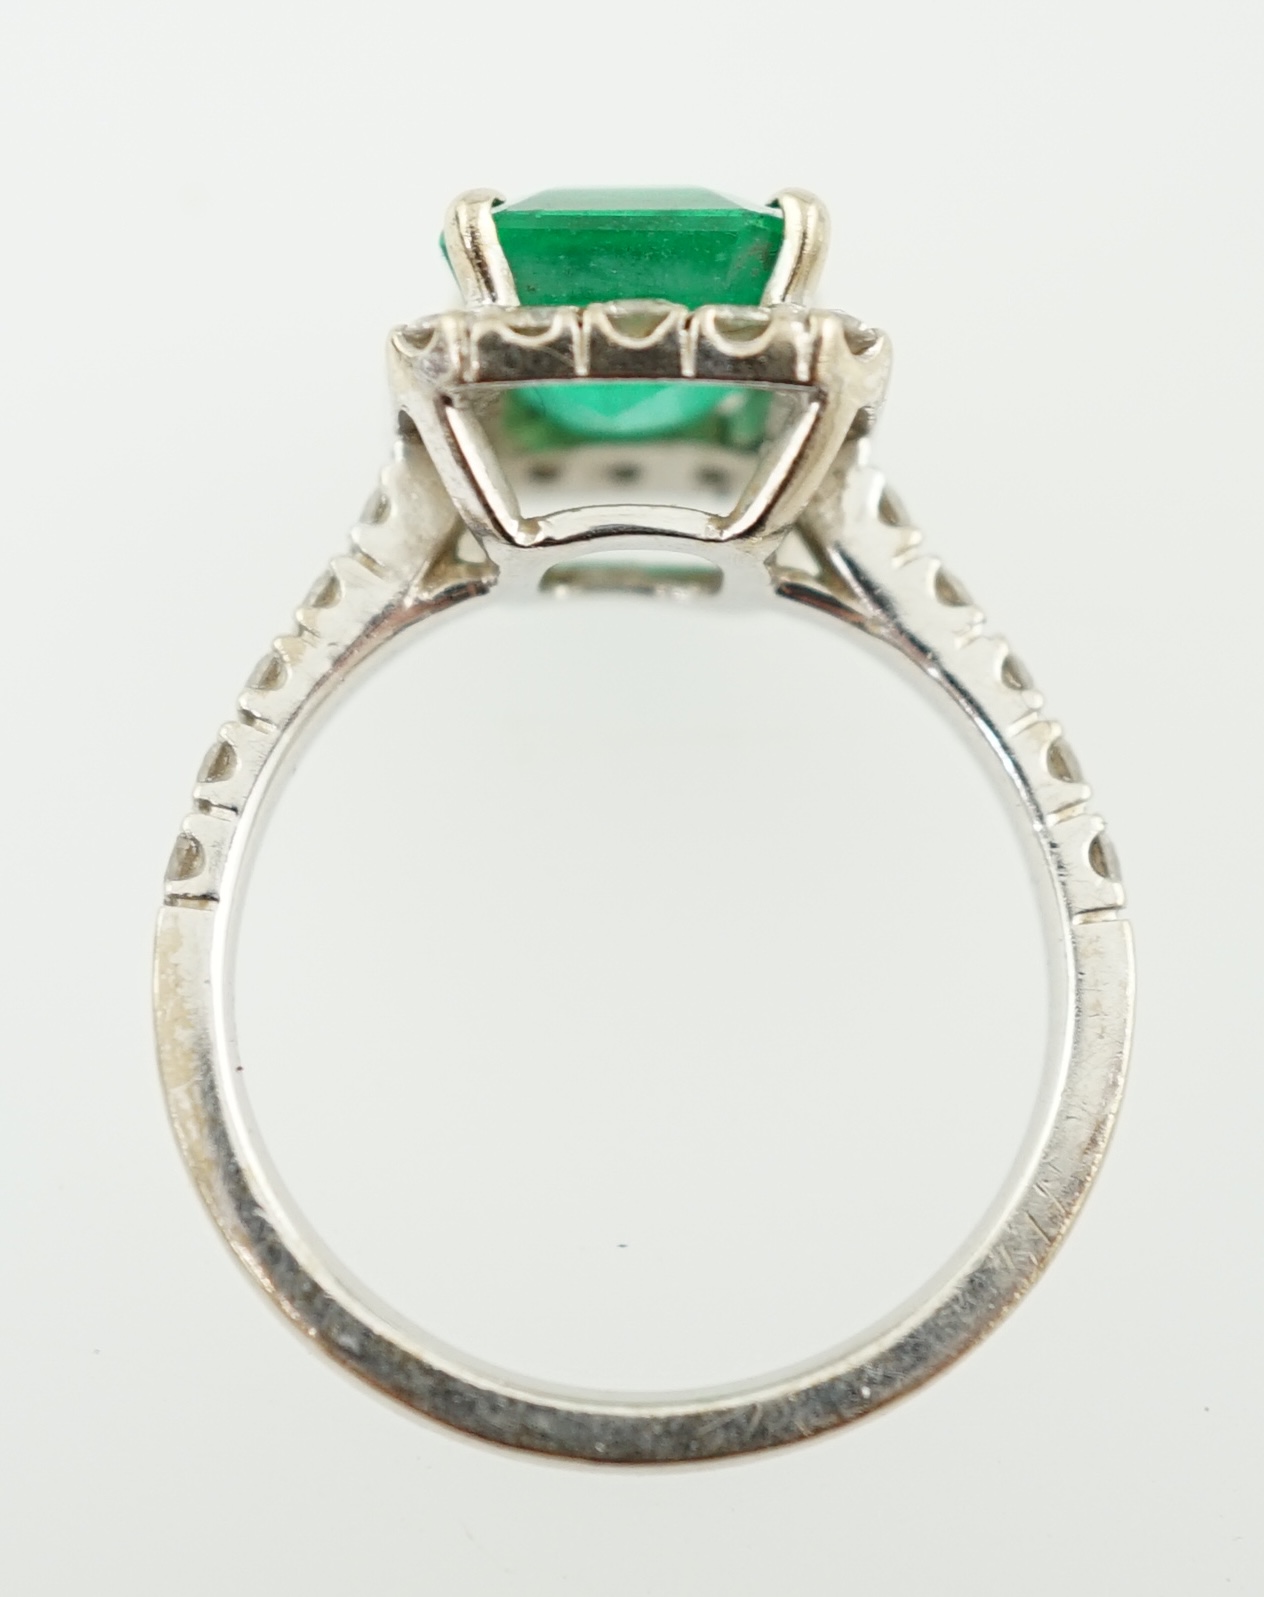 A modern 18k white gold, emerald and diamond set square cluster ring